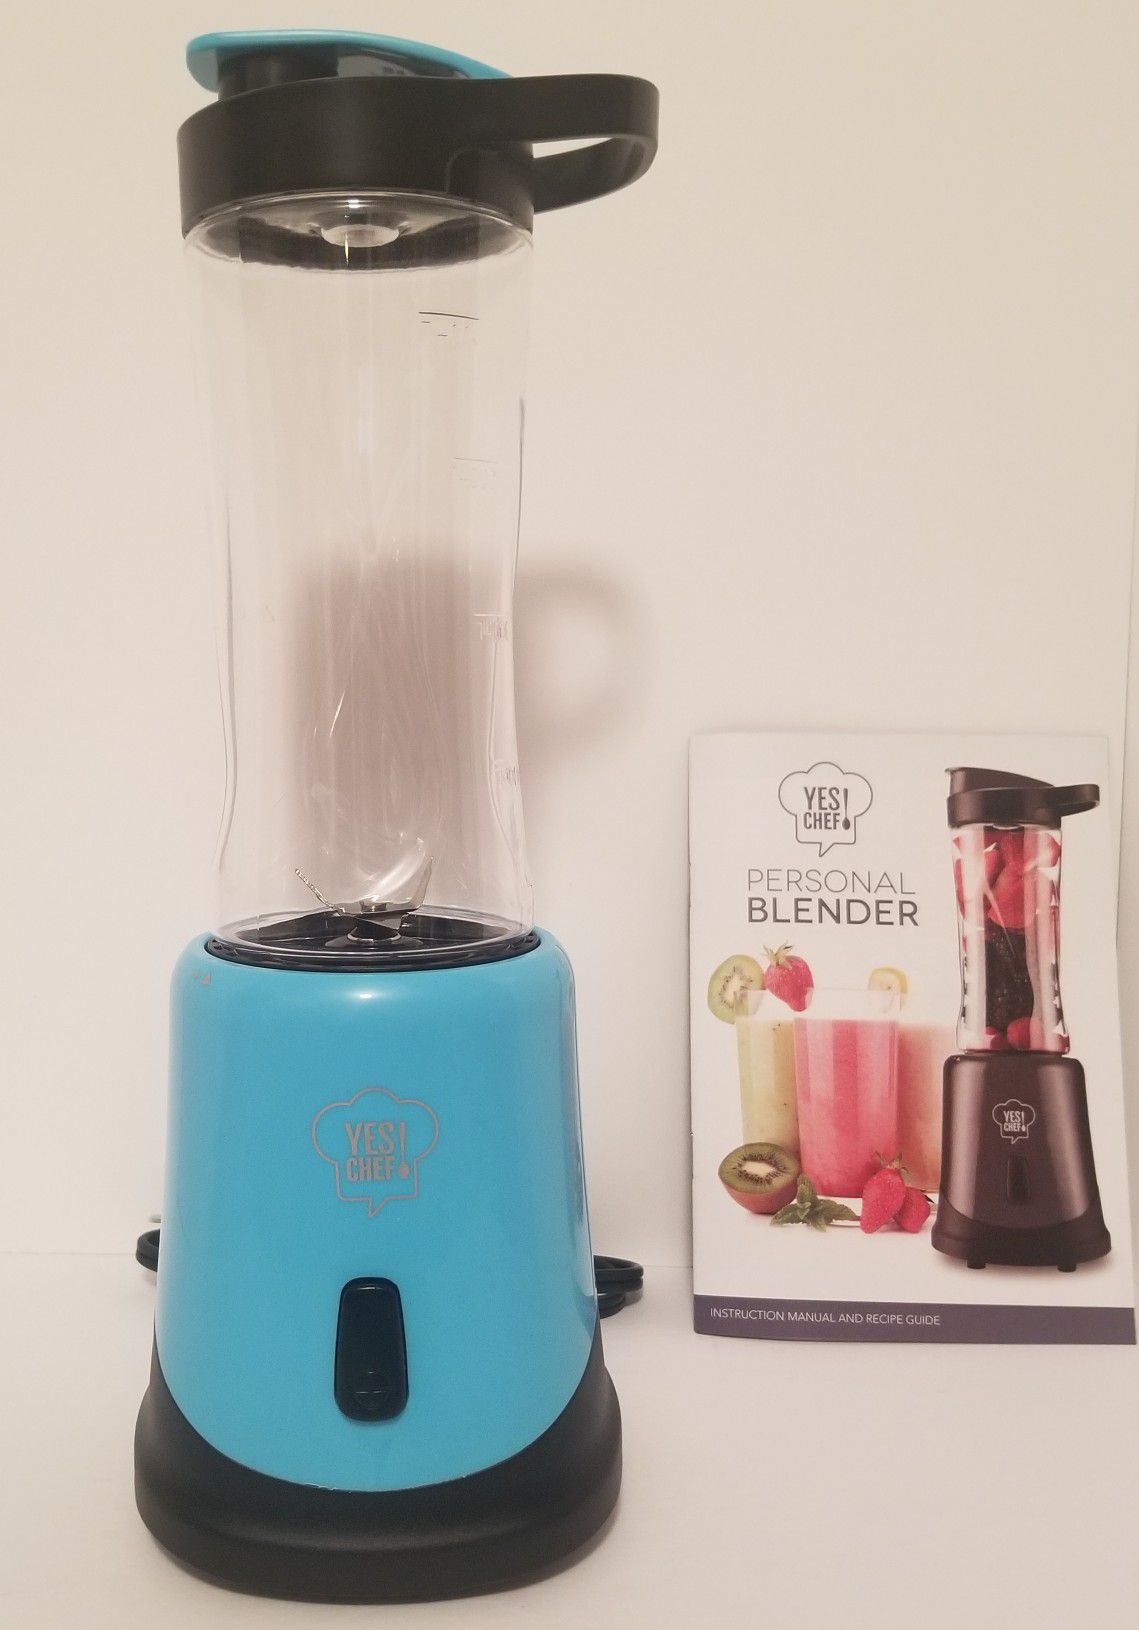 Yes chef personal blender in colors orange,red,and green blue is sold out